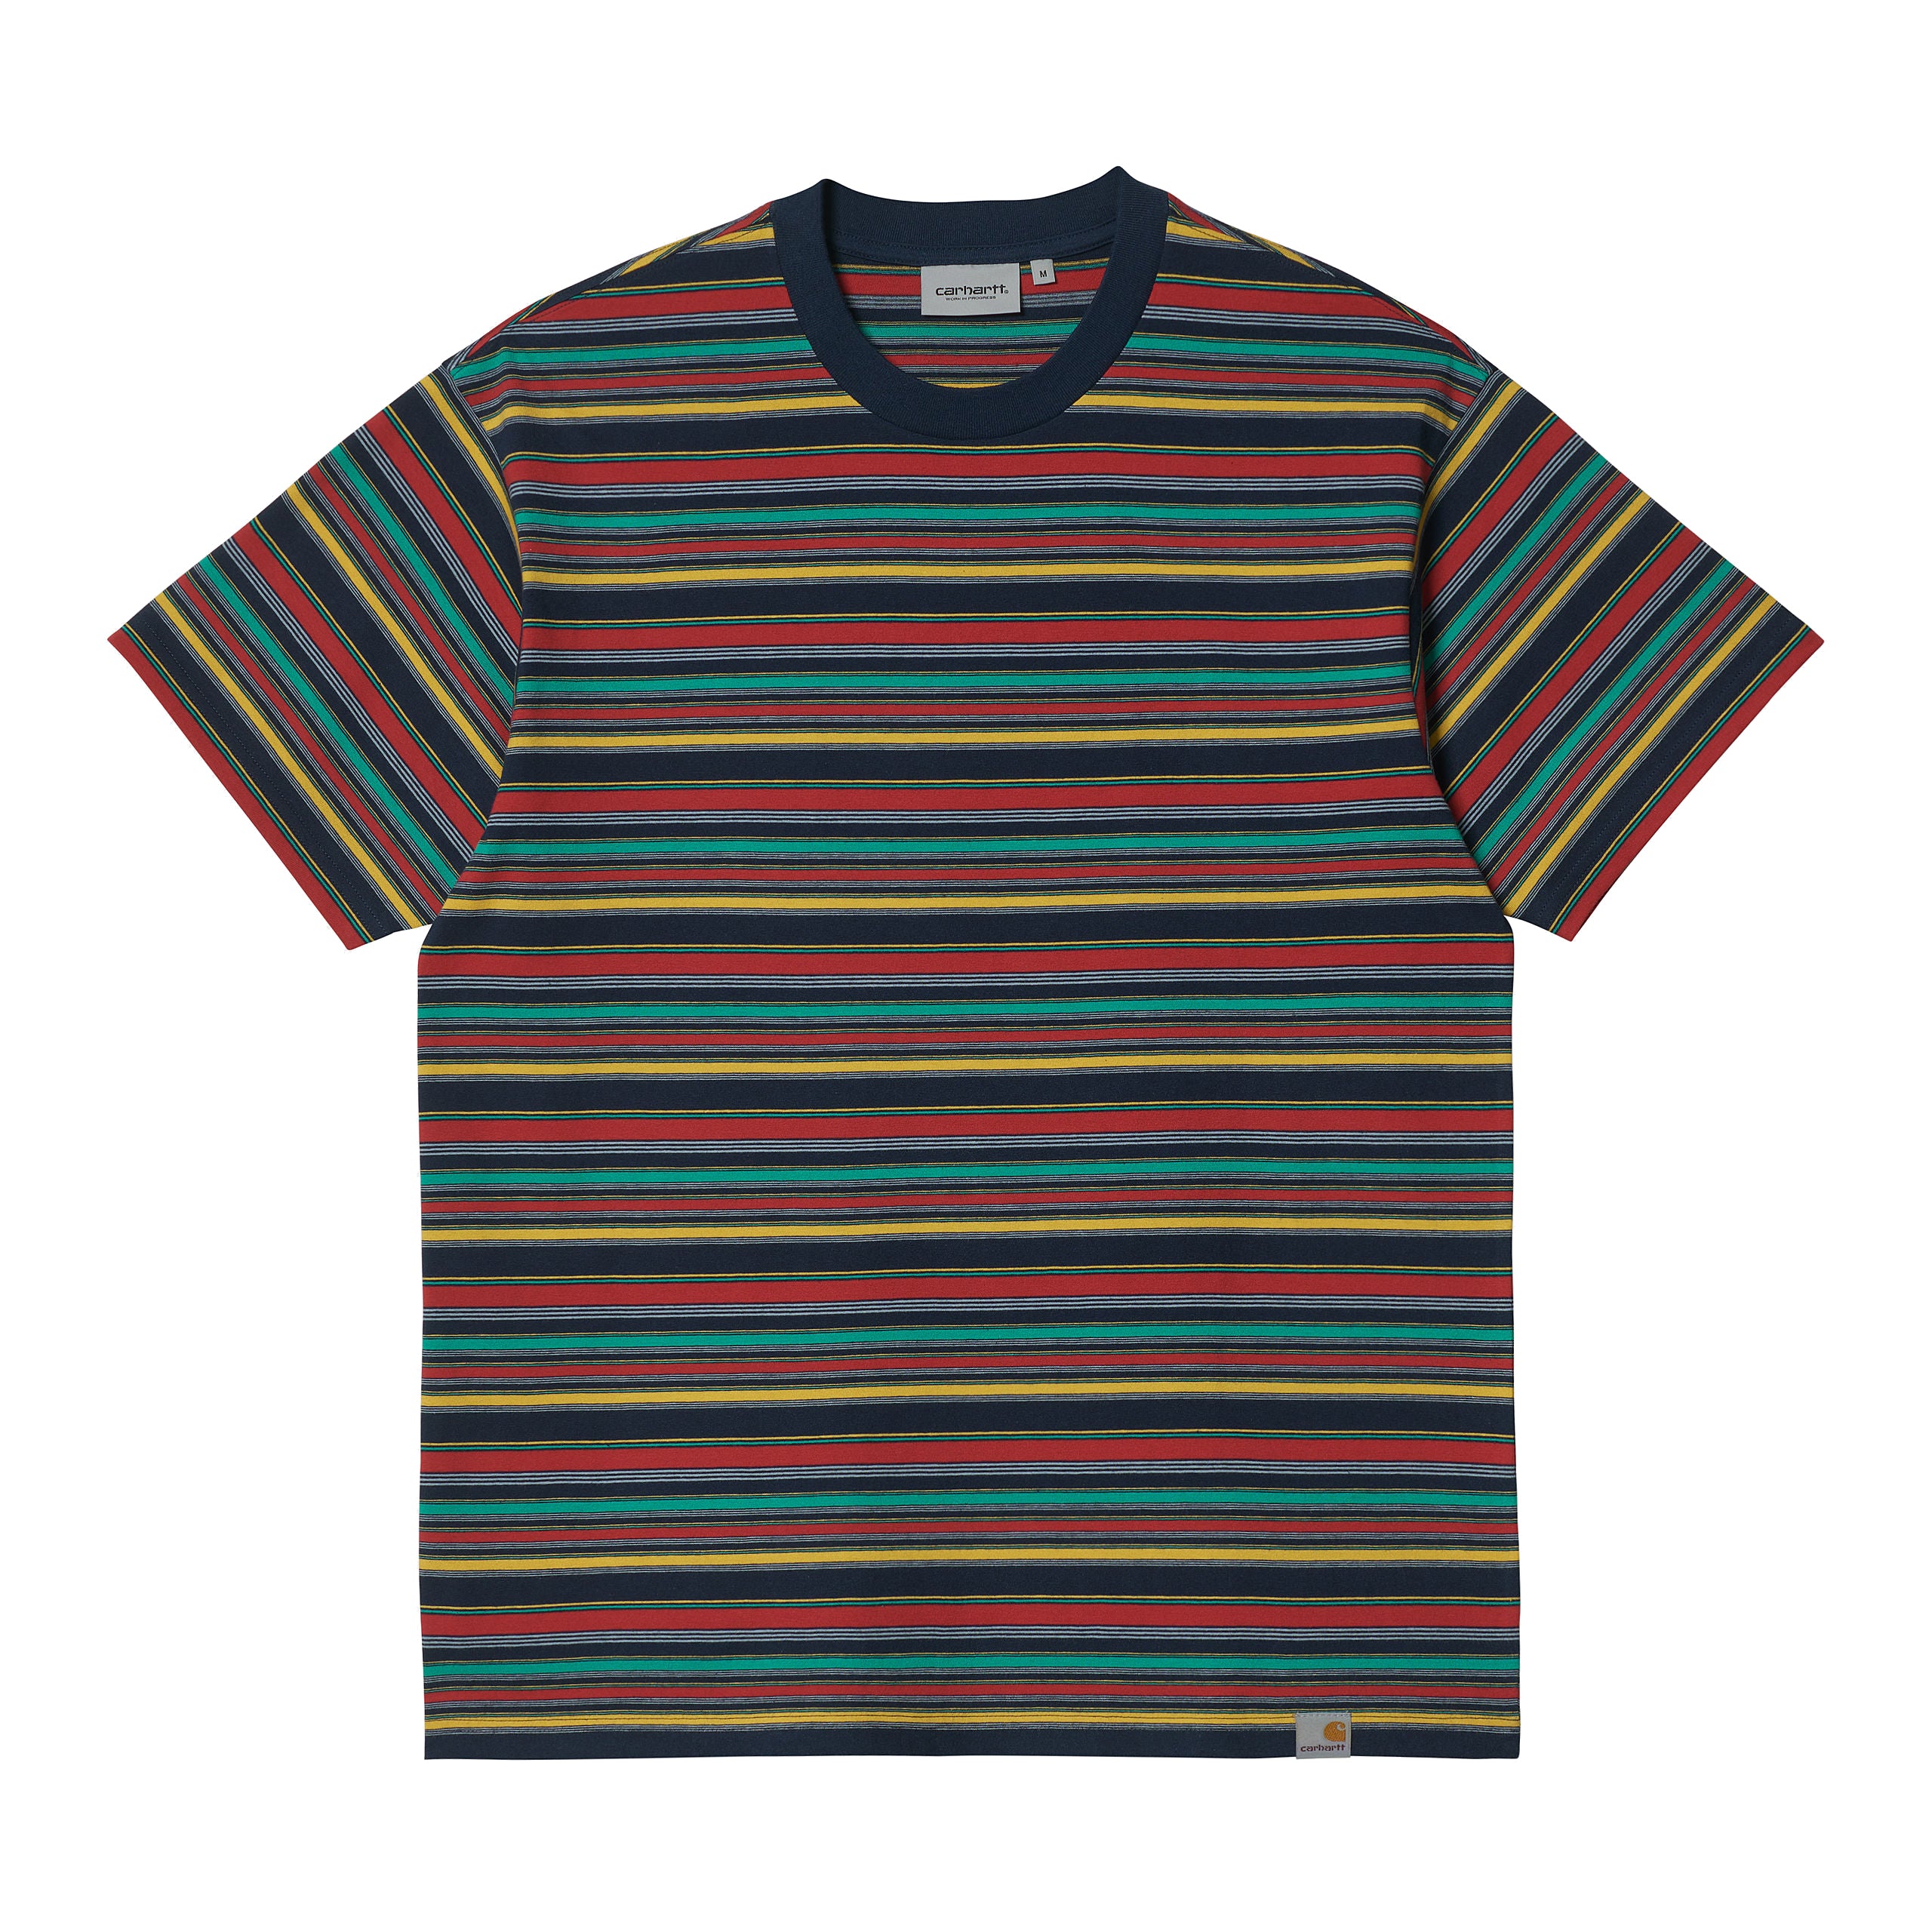 S/S Riggs T-shirt